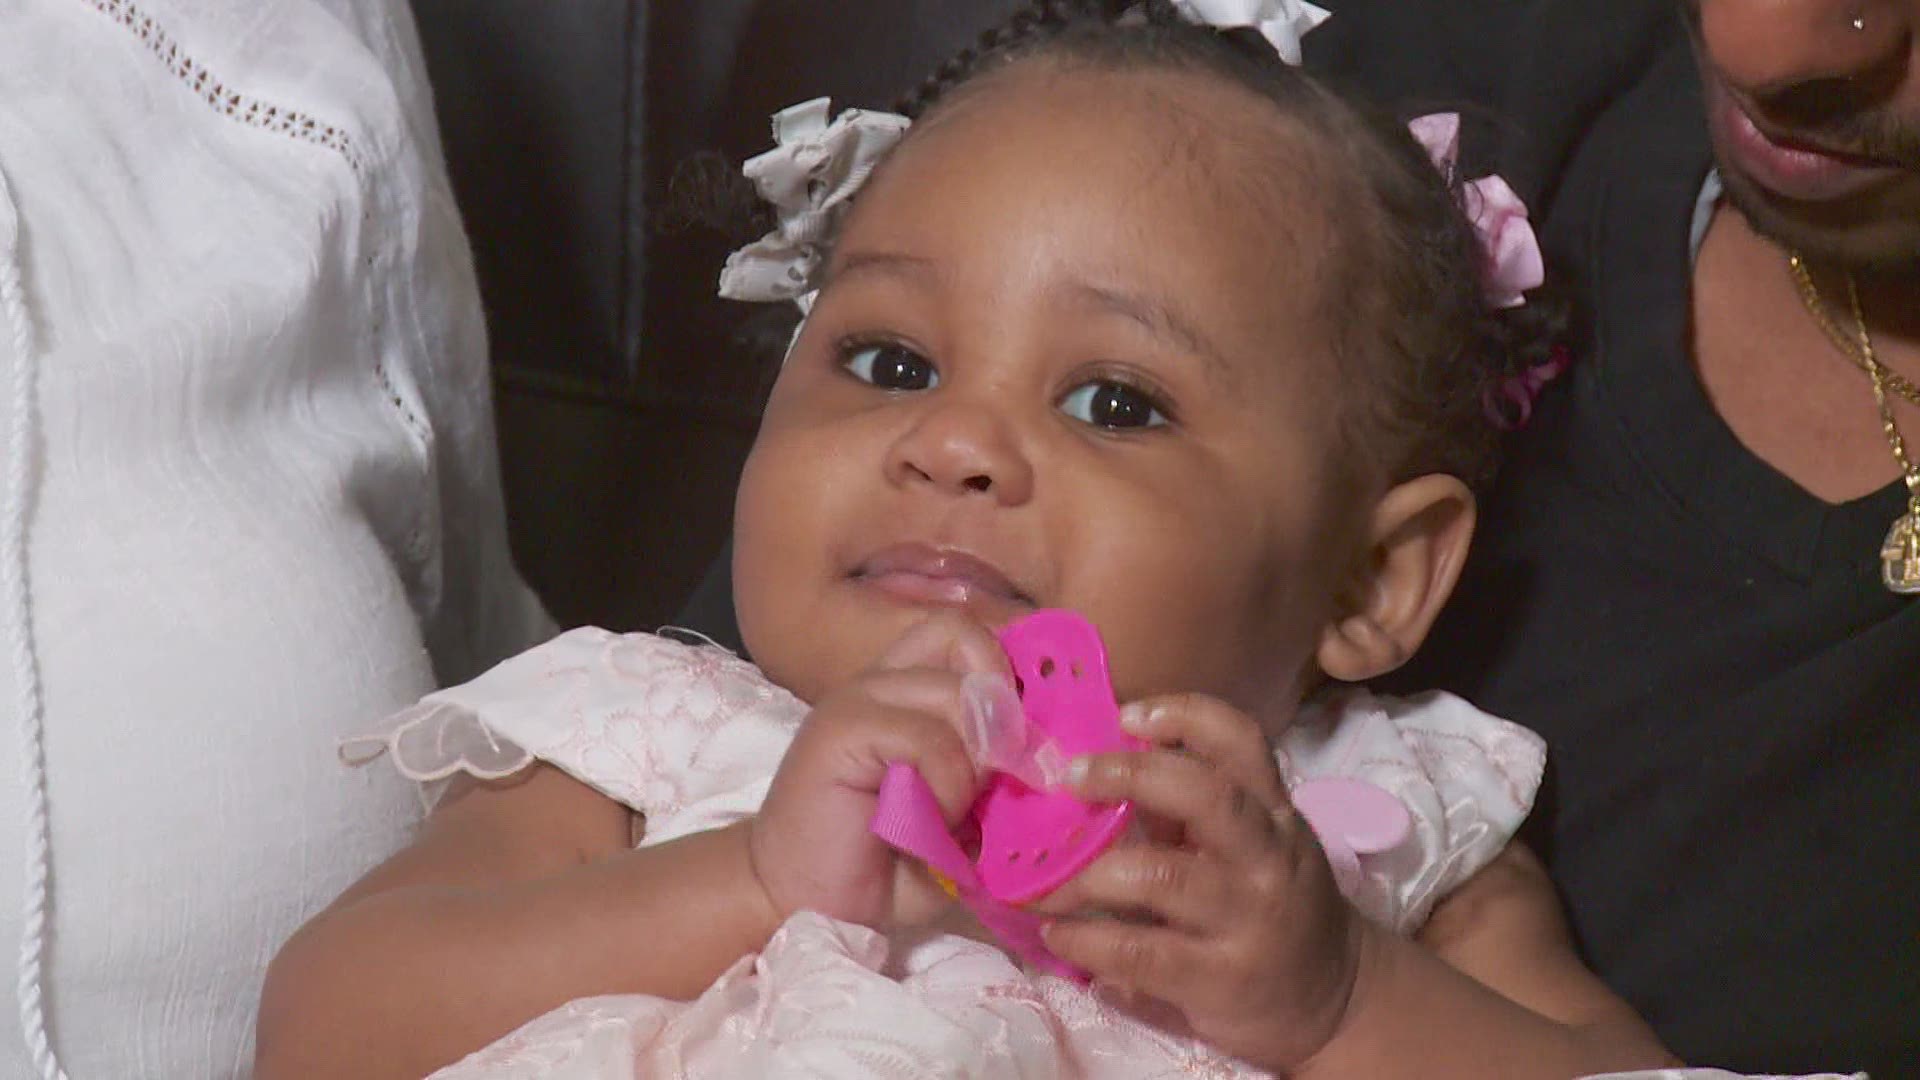 A 1-year-old baby has beaten the odds by defeating COVID and liver failure all in her first year of life.